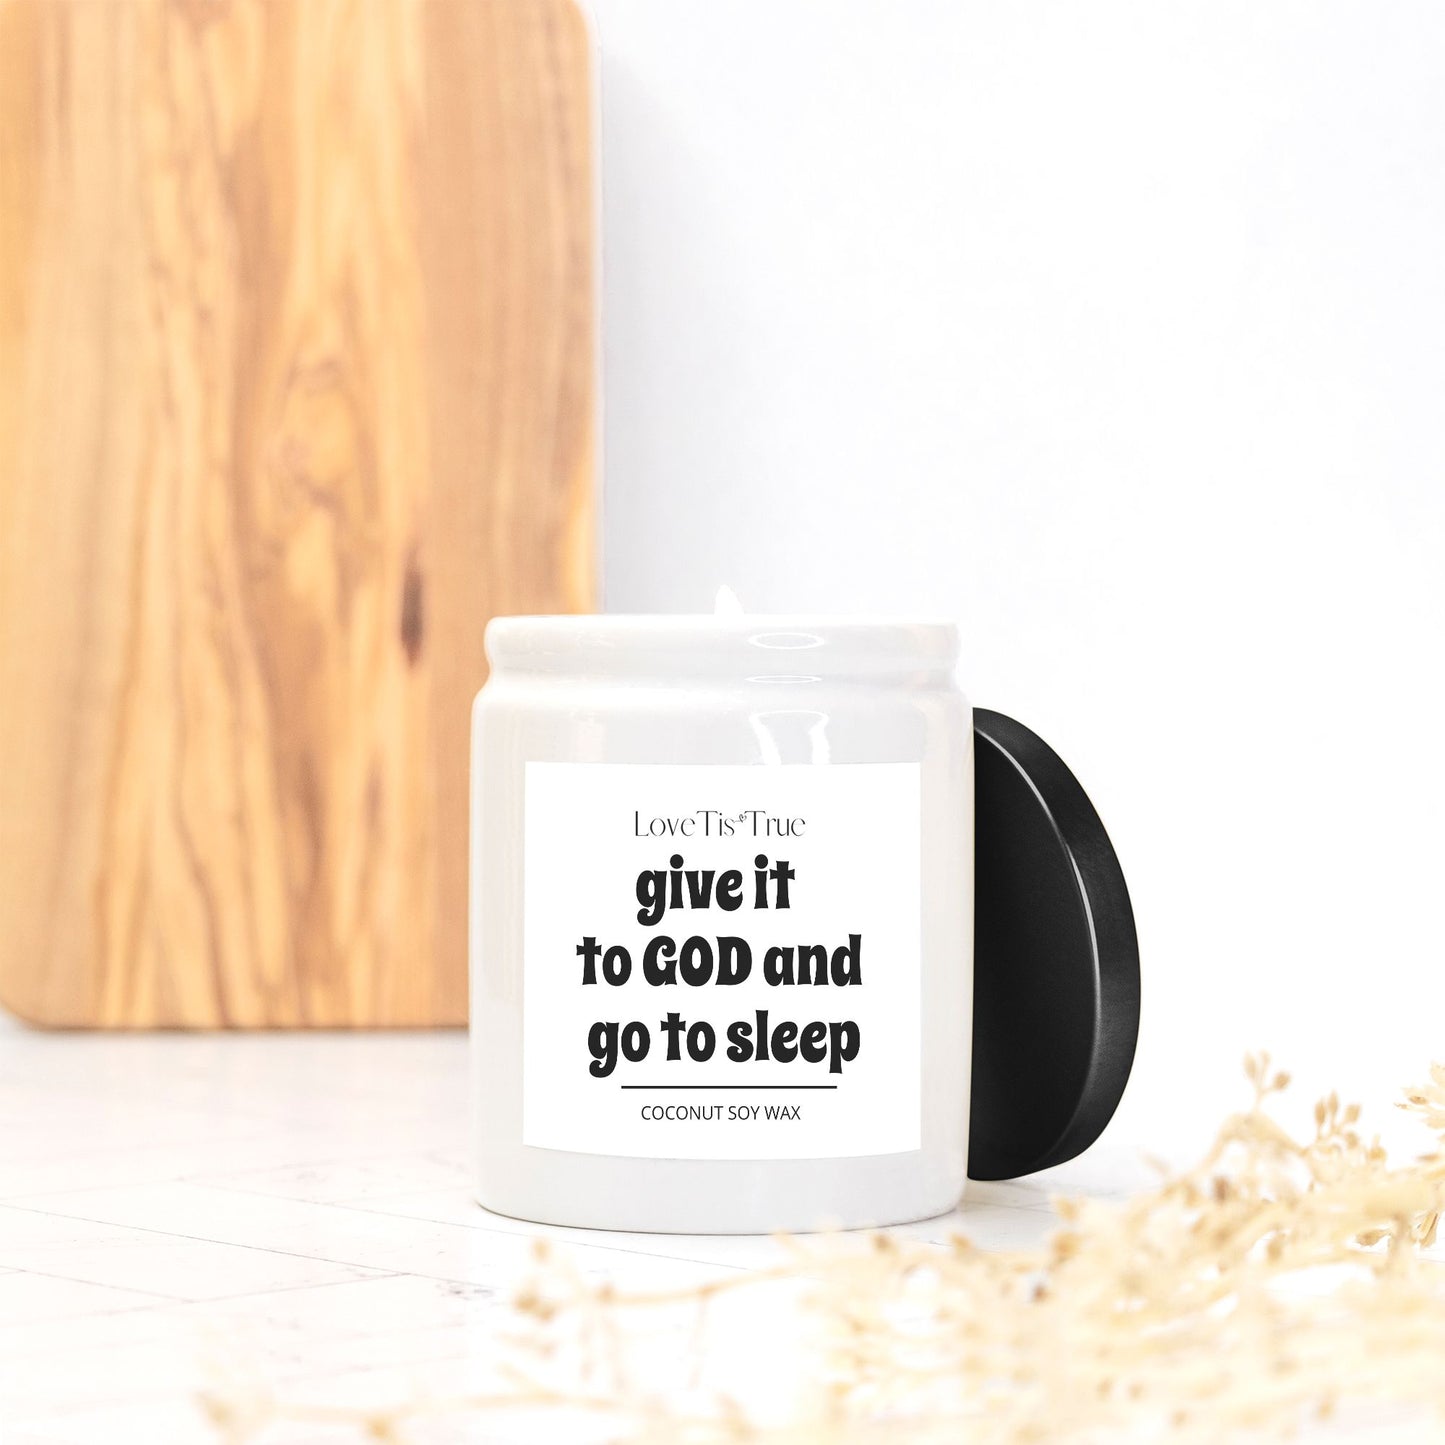 Give it to God and go to sleep Candle Ceramic 8oz (White)